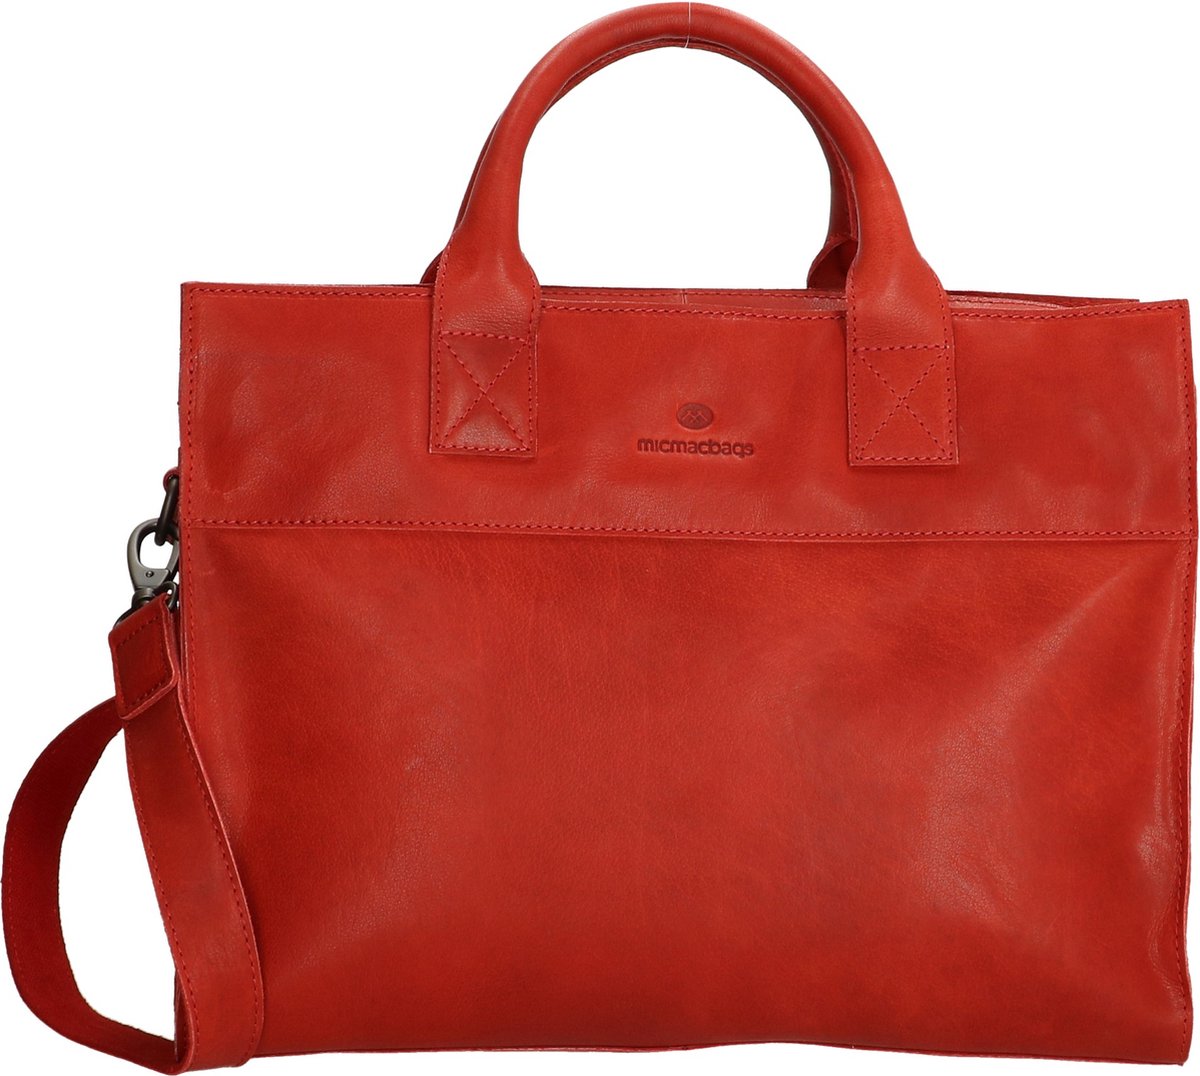 Micmacbags Golden Gate Luiertas - Rood